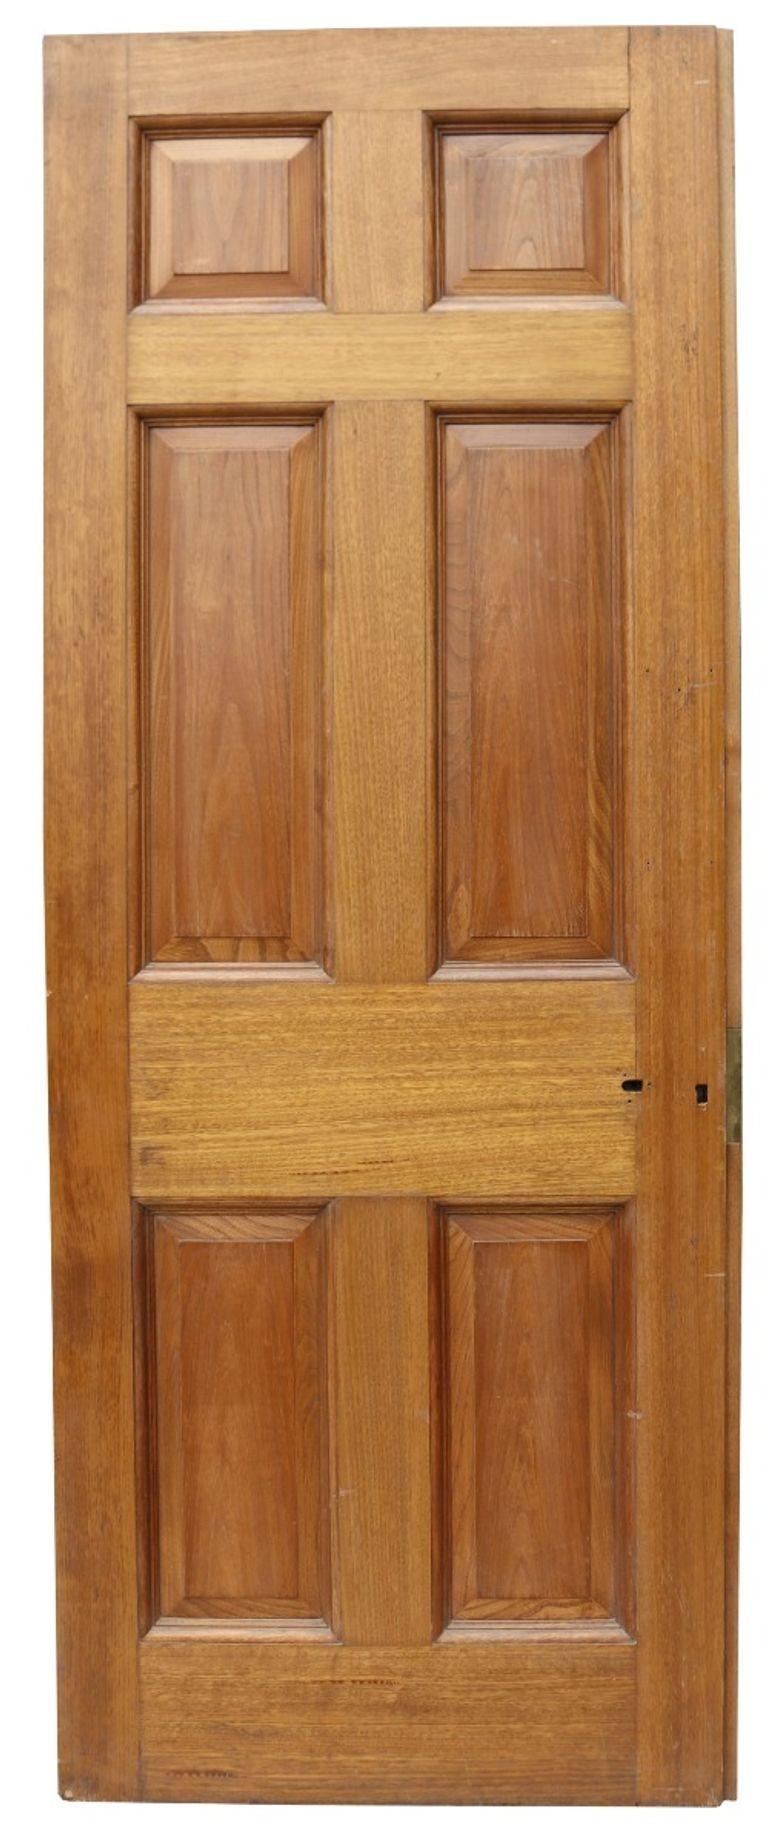 A reclaimed hardwood door suitable for external or internal use.

There is a varnished finish to both sides.